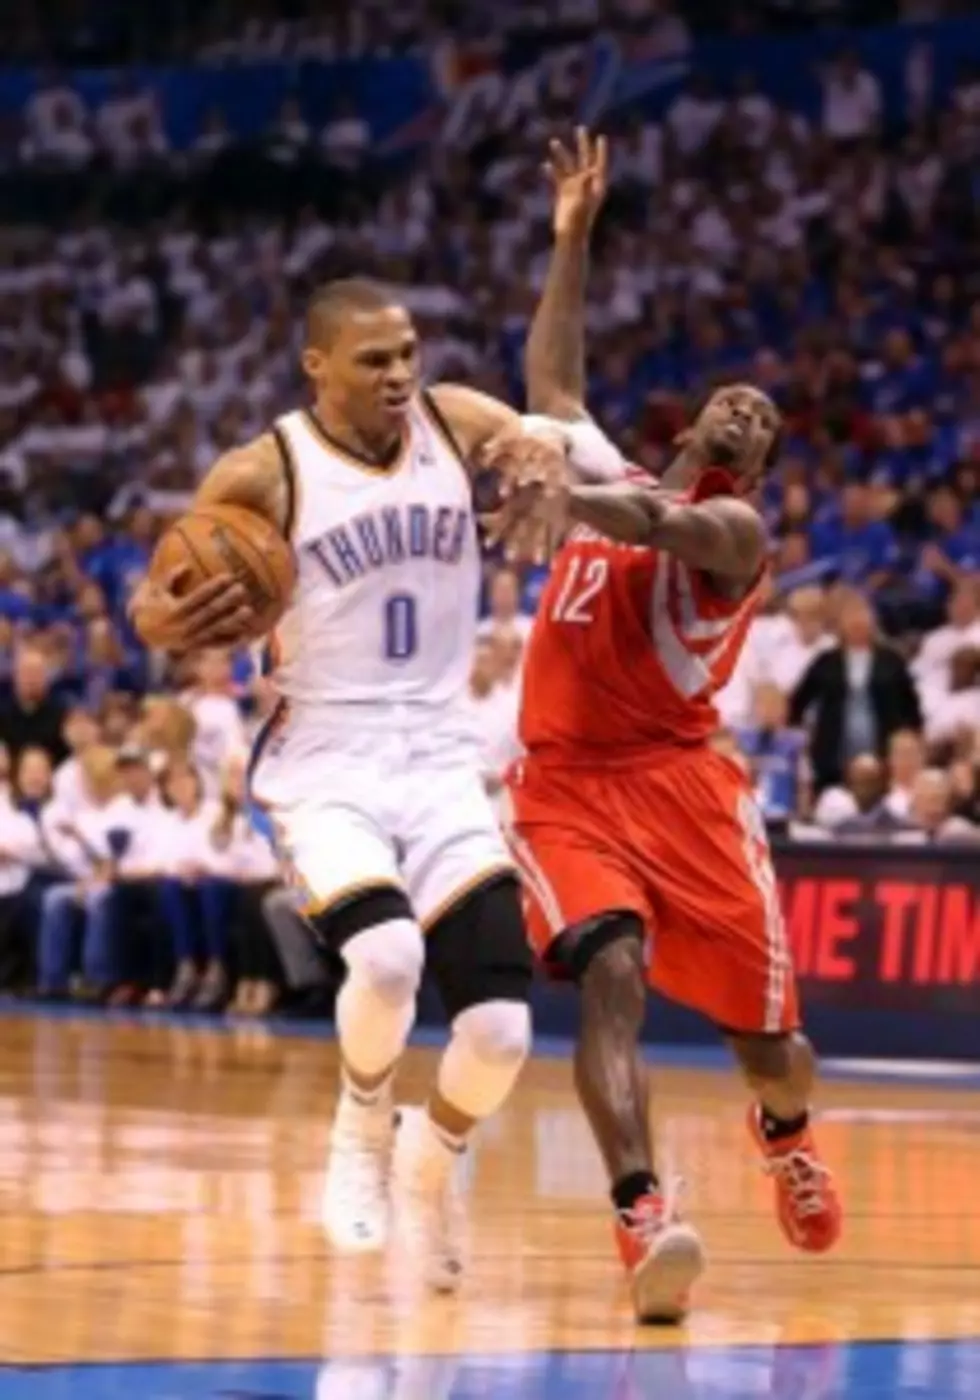 Thunder Guard Russell Westbrook Out Indefinitely